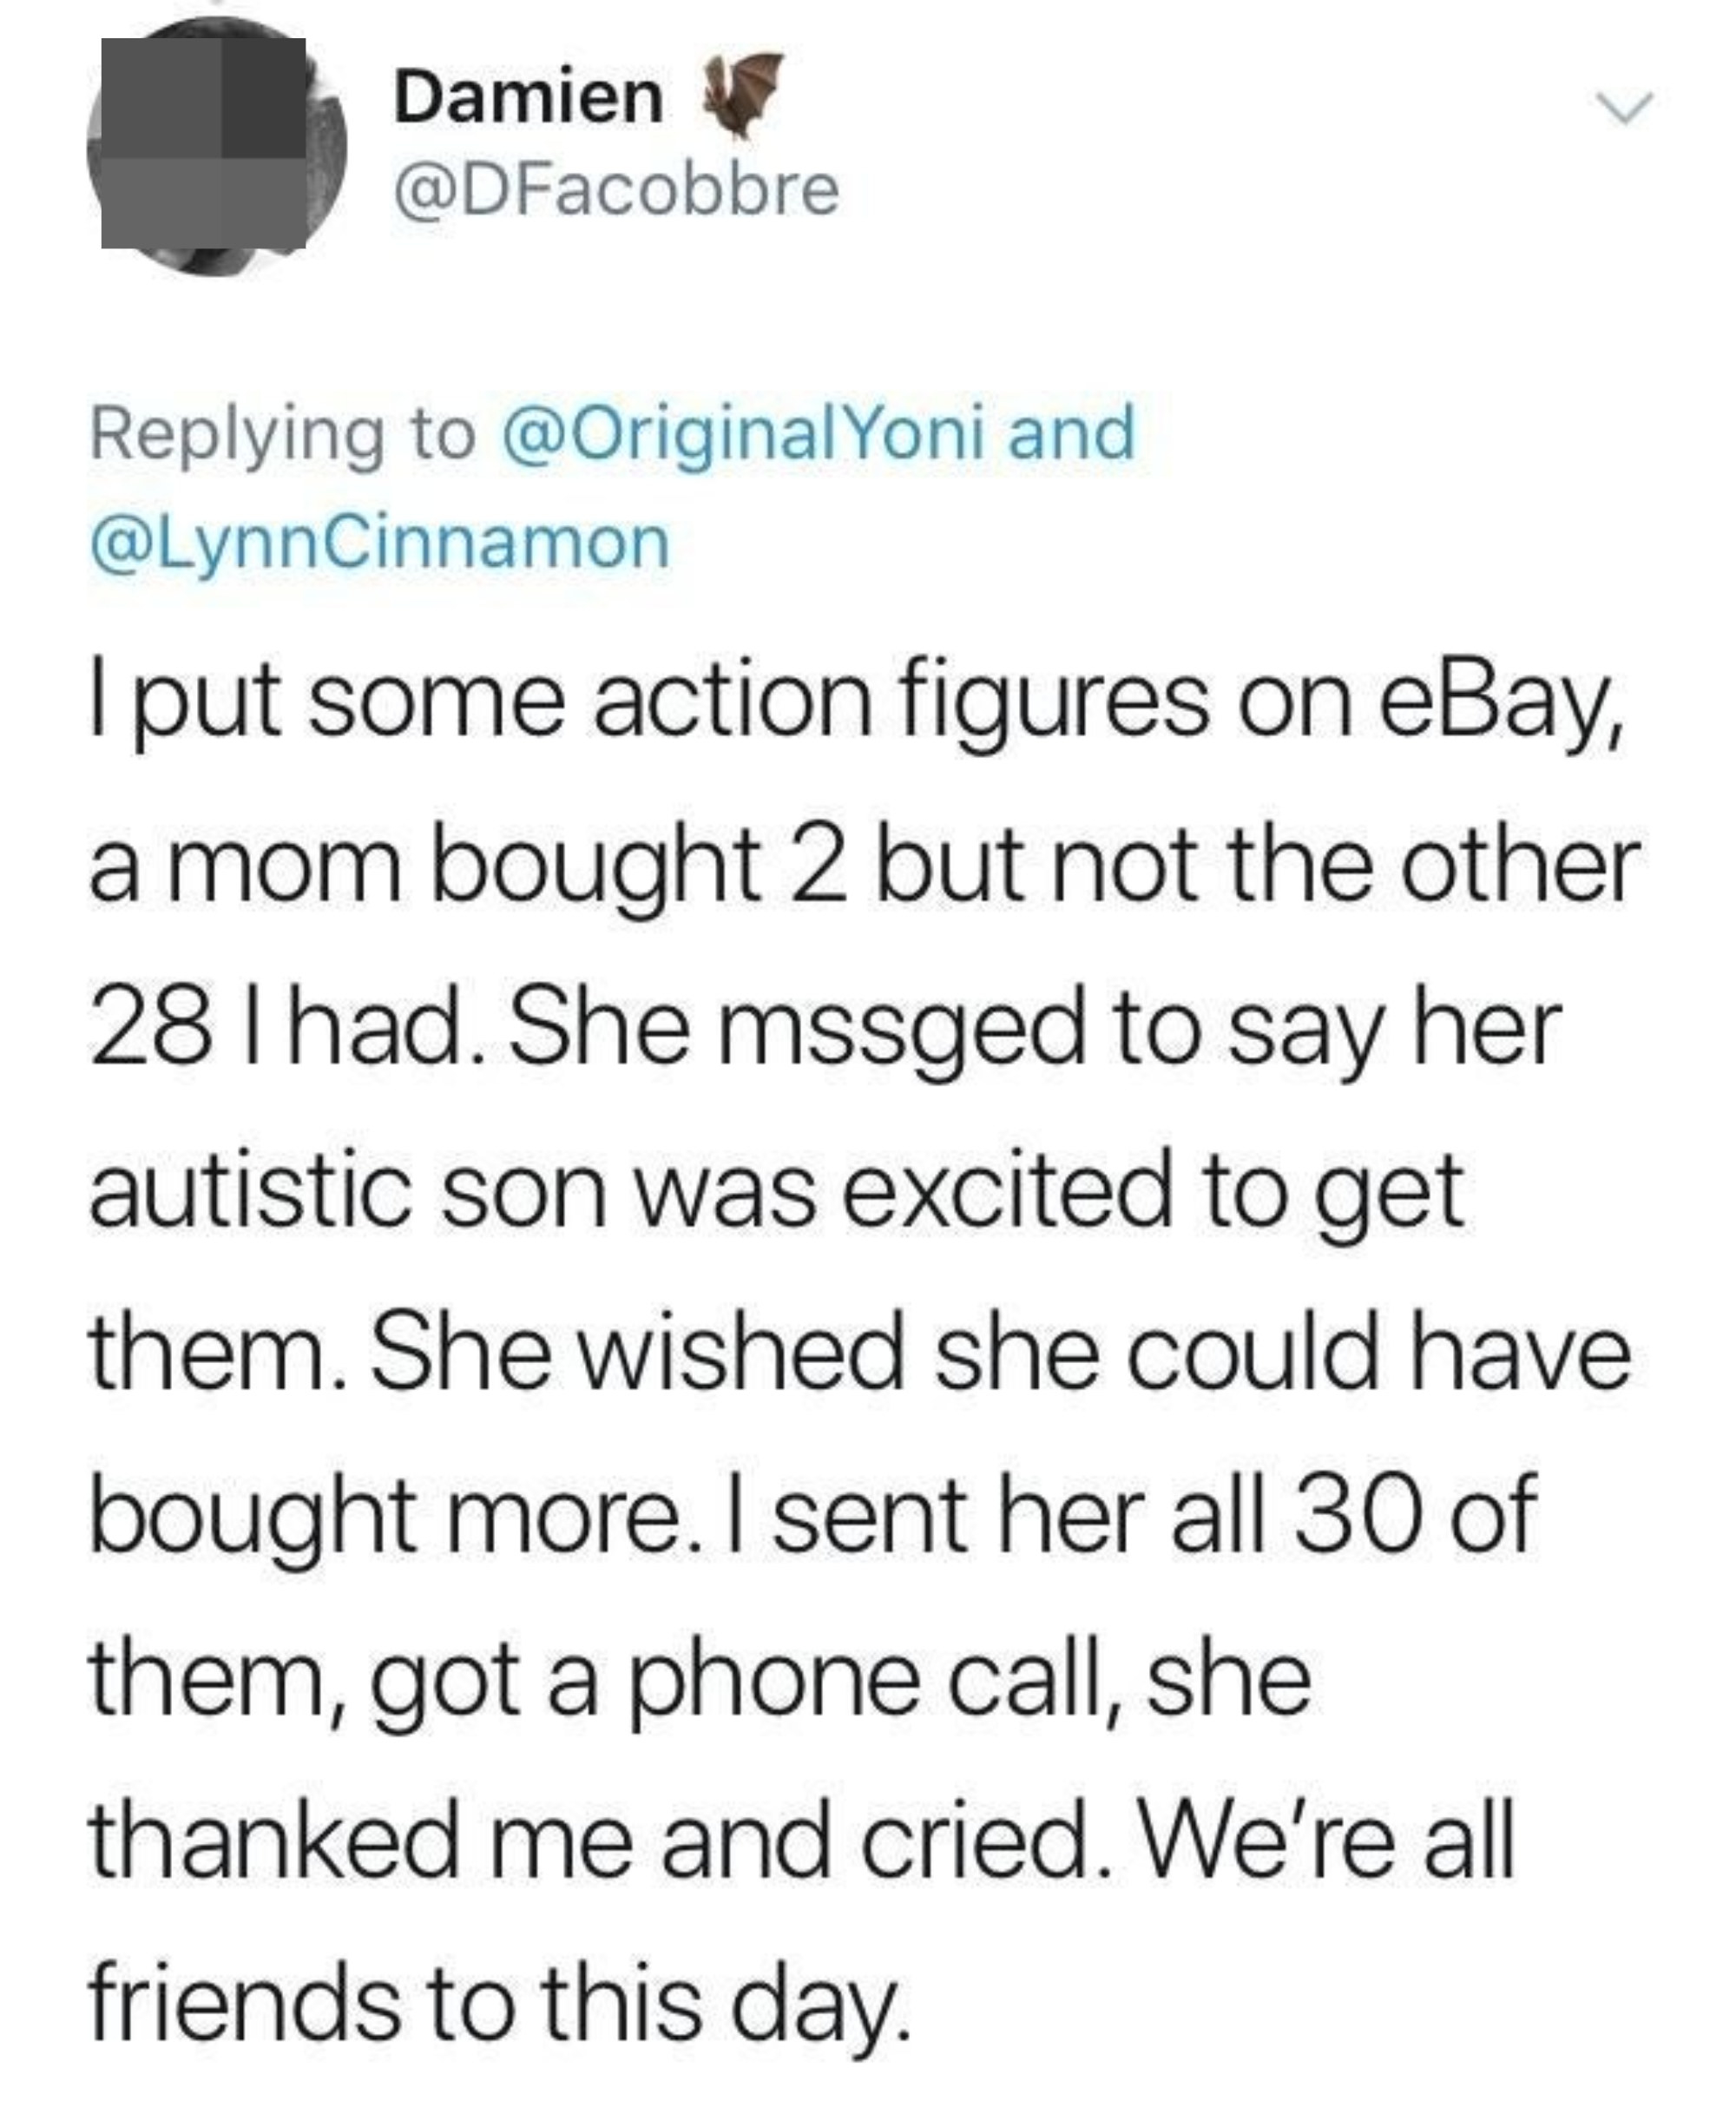 Person selling 30 action figures on eBay sold 2 to a mom for her autistic son and said she wished she could get all 30 for him; the person ended up sending her all 30, and the mom called them, thanked them, and cried, and they&#x27;re friends to this day